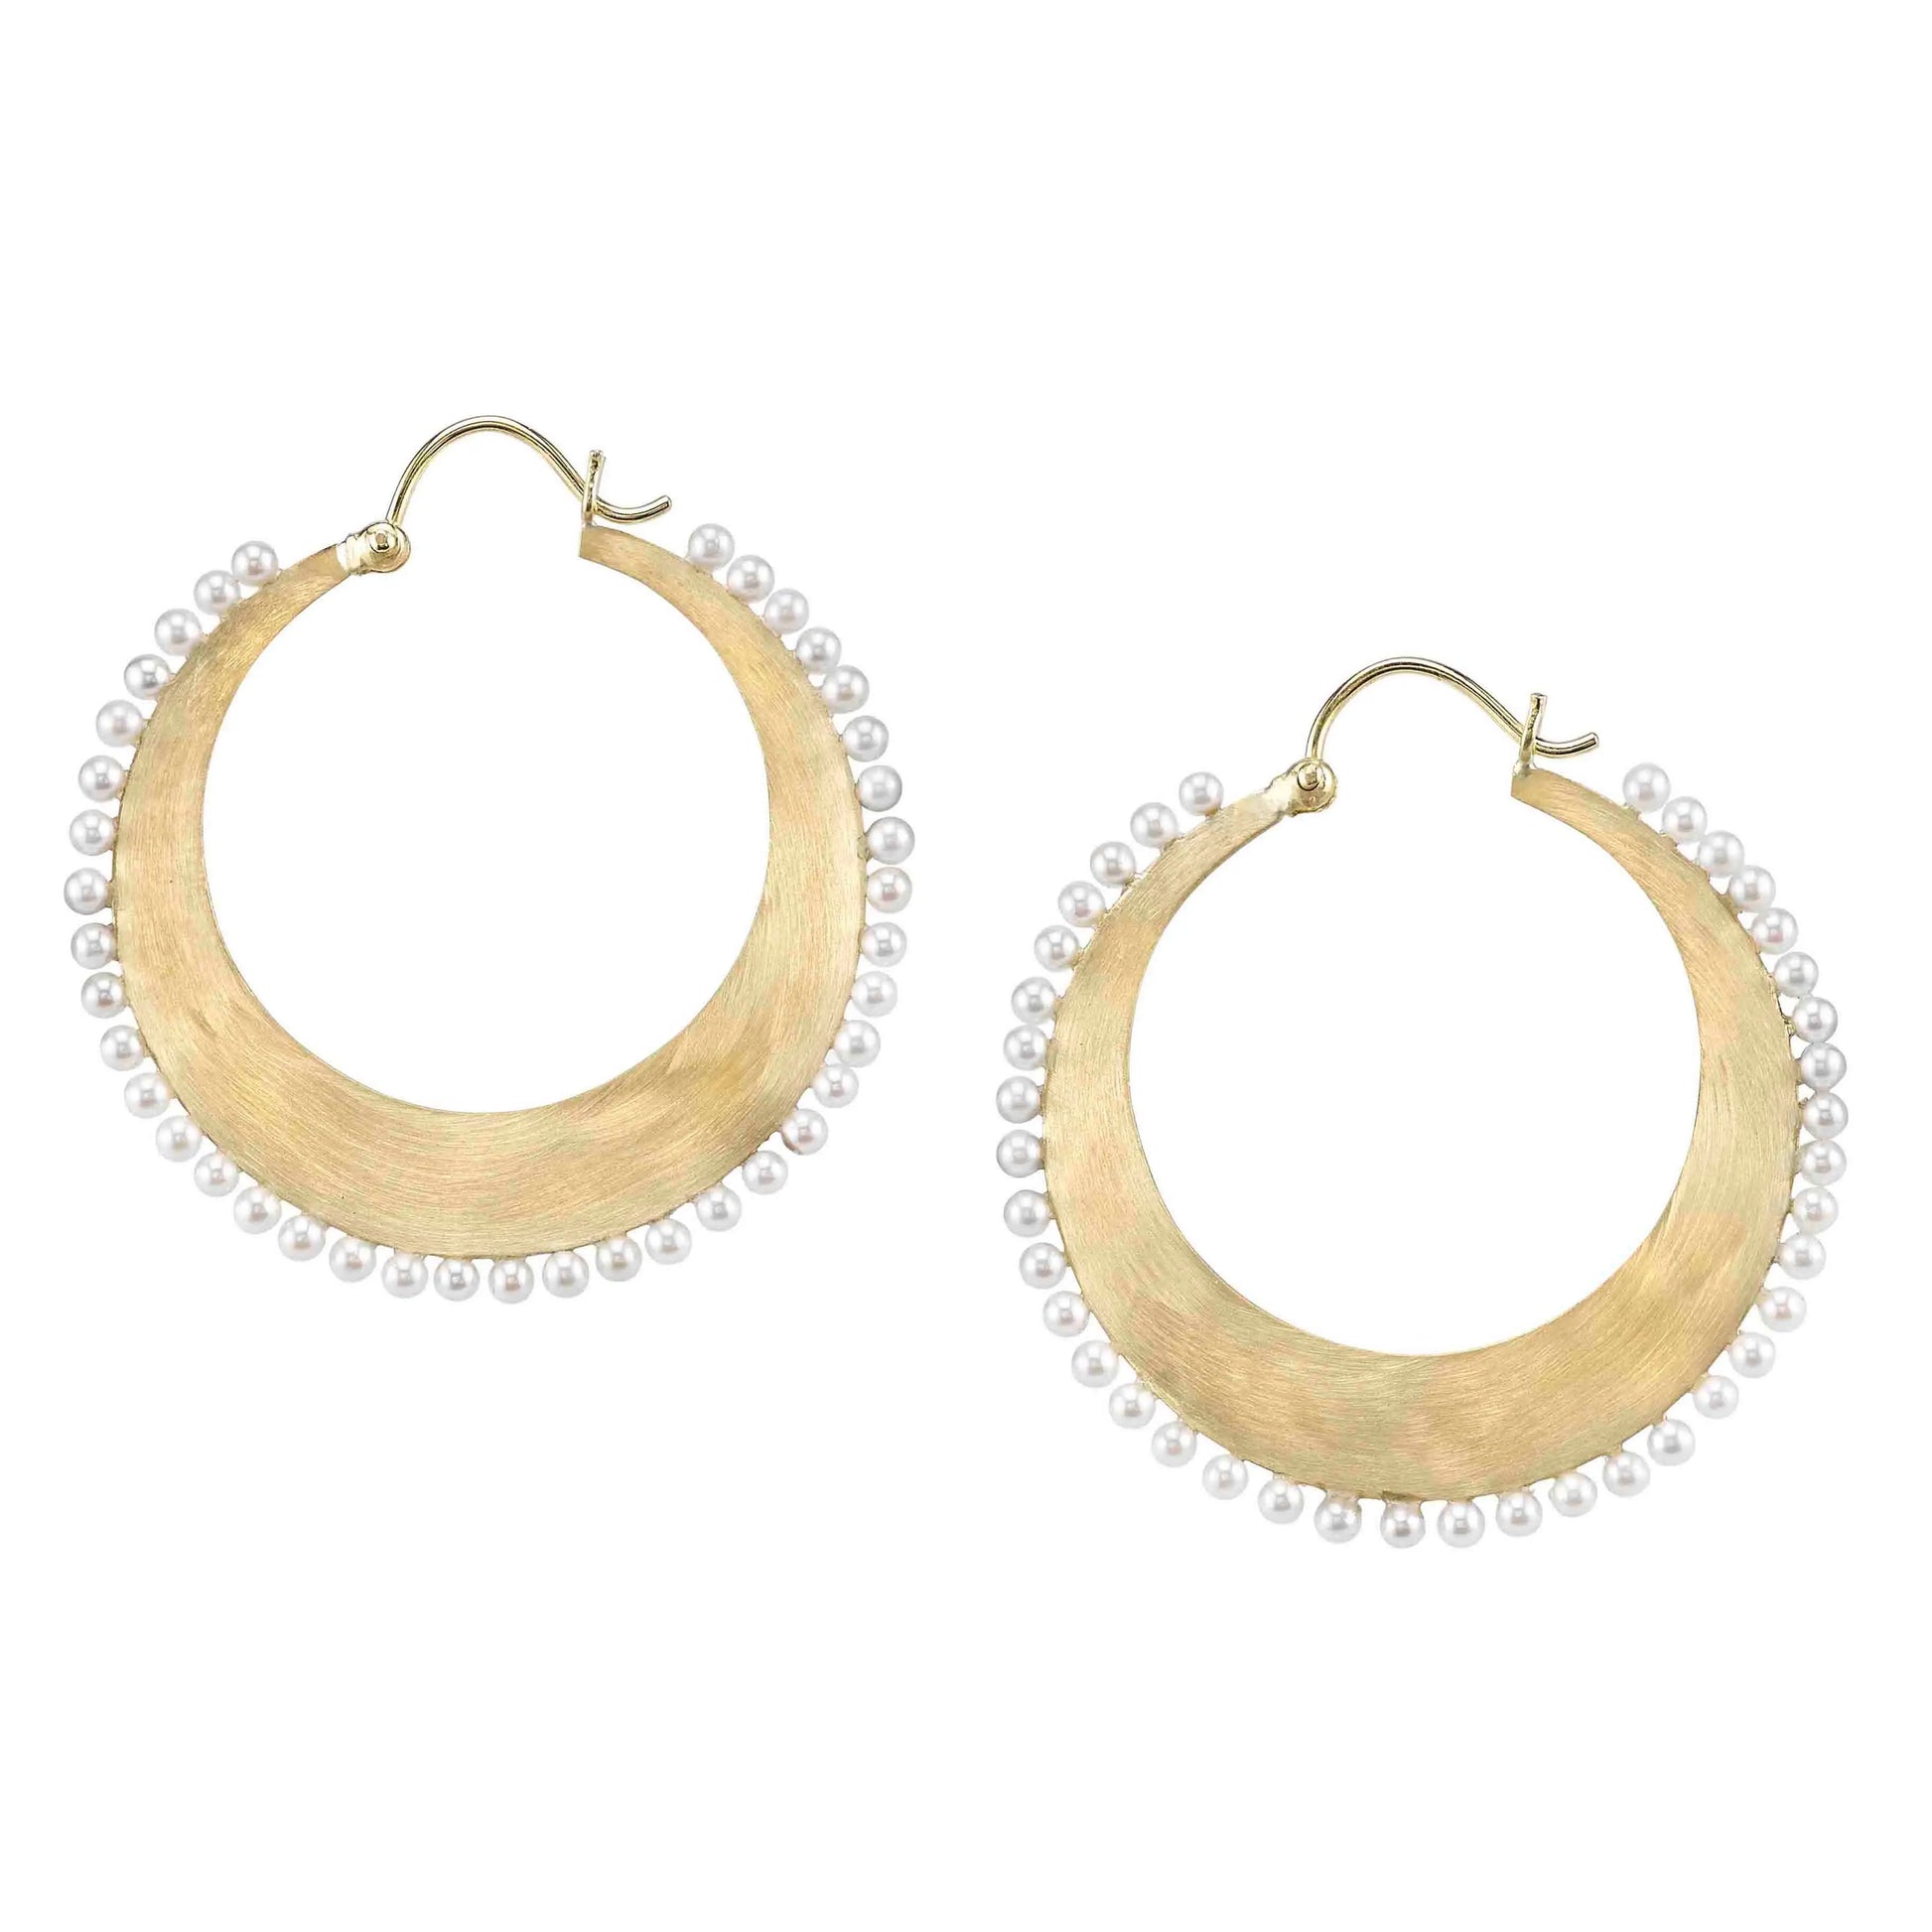 Amazing hoops with 2mm white round cultured Akoya Pearls in 18k yellow gold.  Measures 1.5 inches long.   If an item is out of stock, please allow 3-6 weeks for delivery.   Designed by Irene Neuwirth